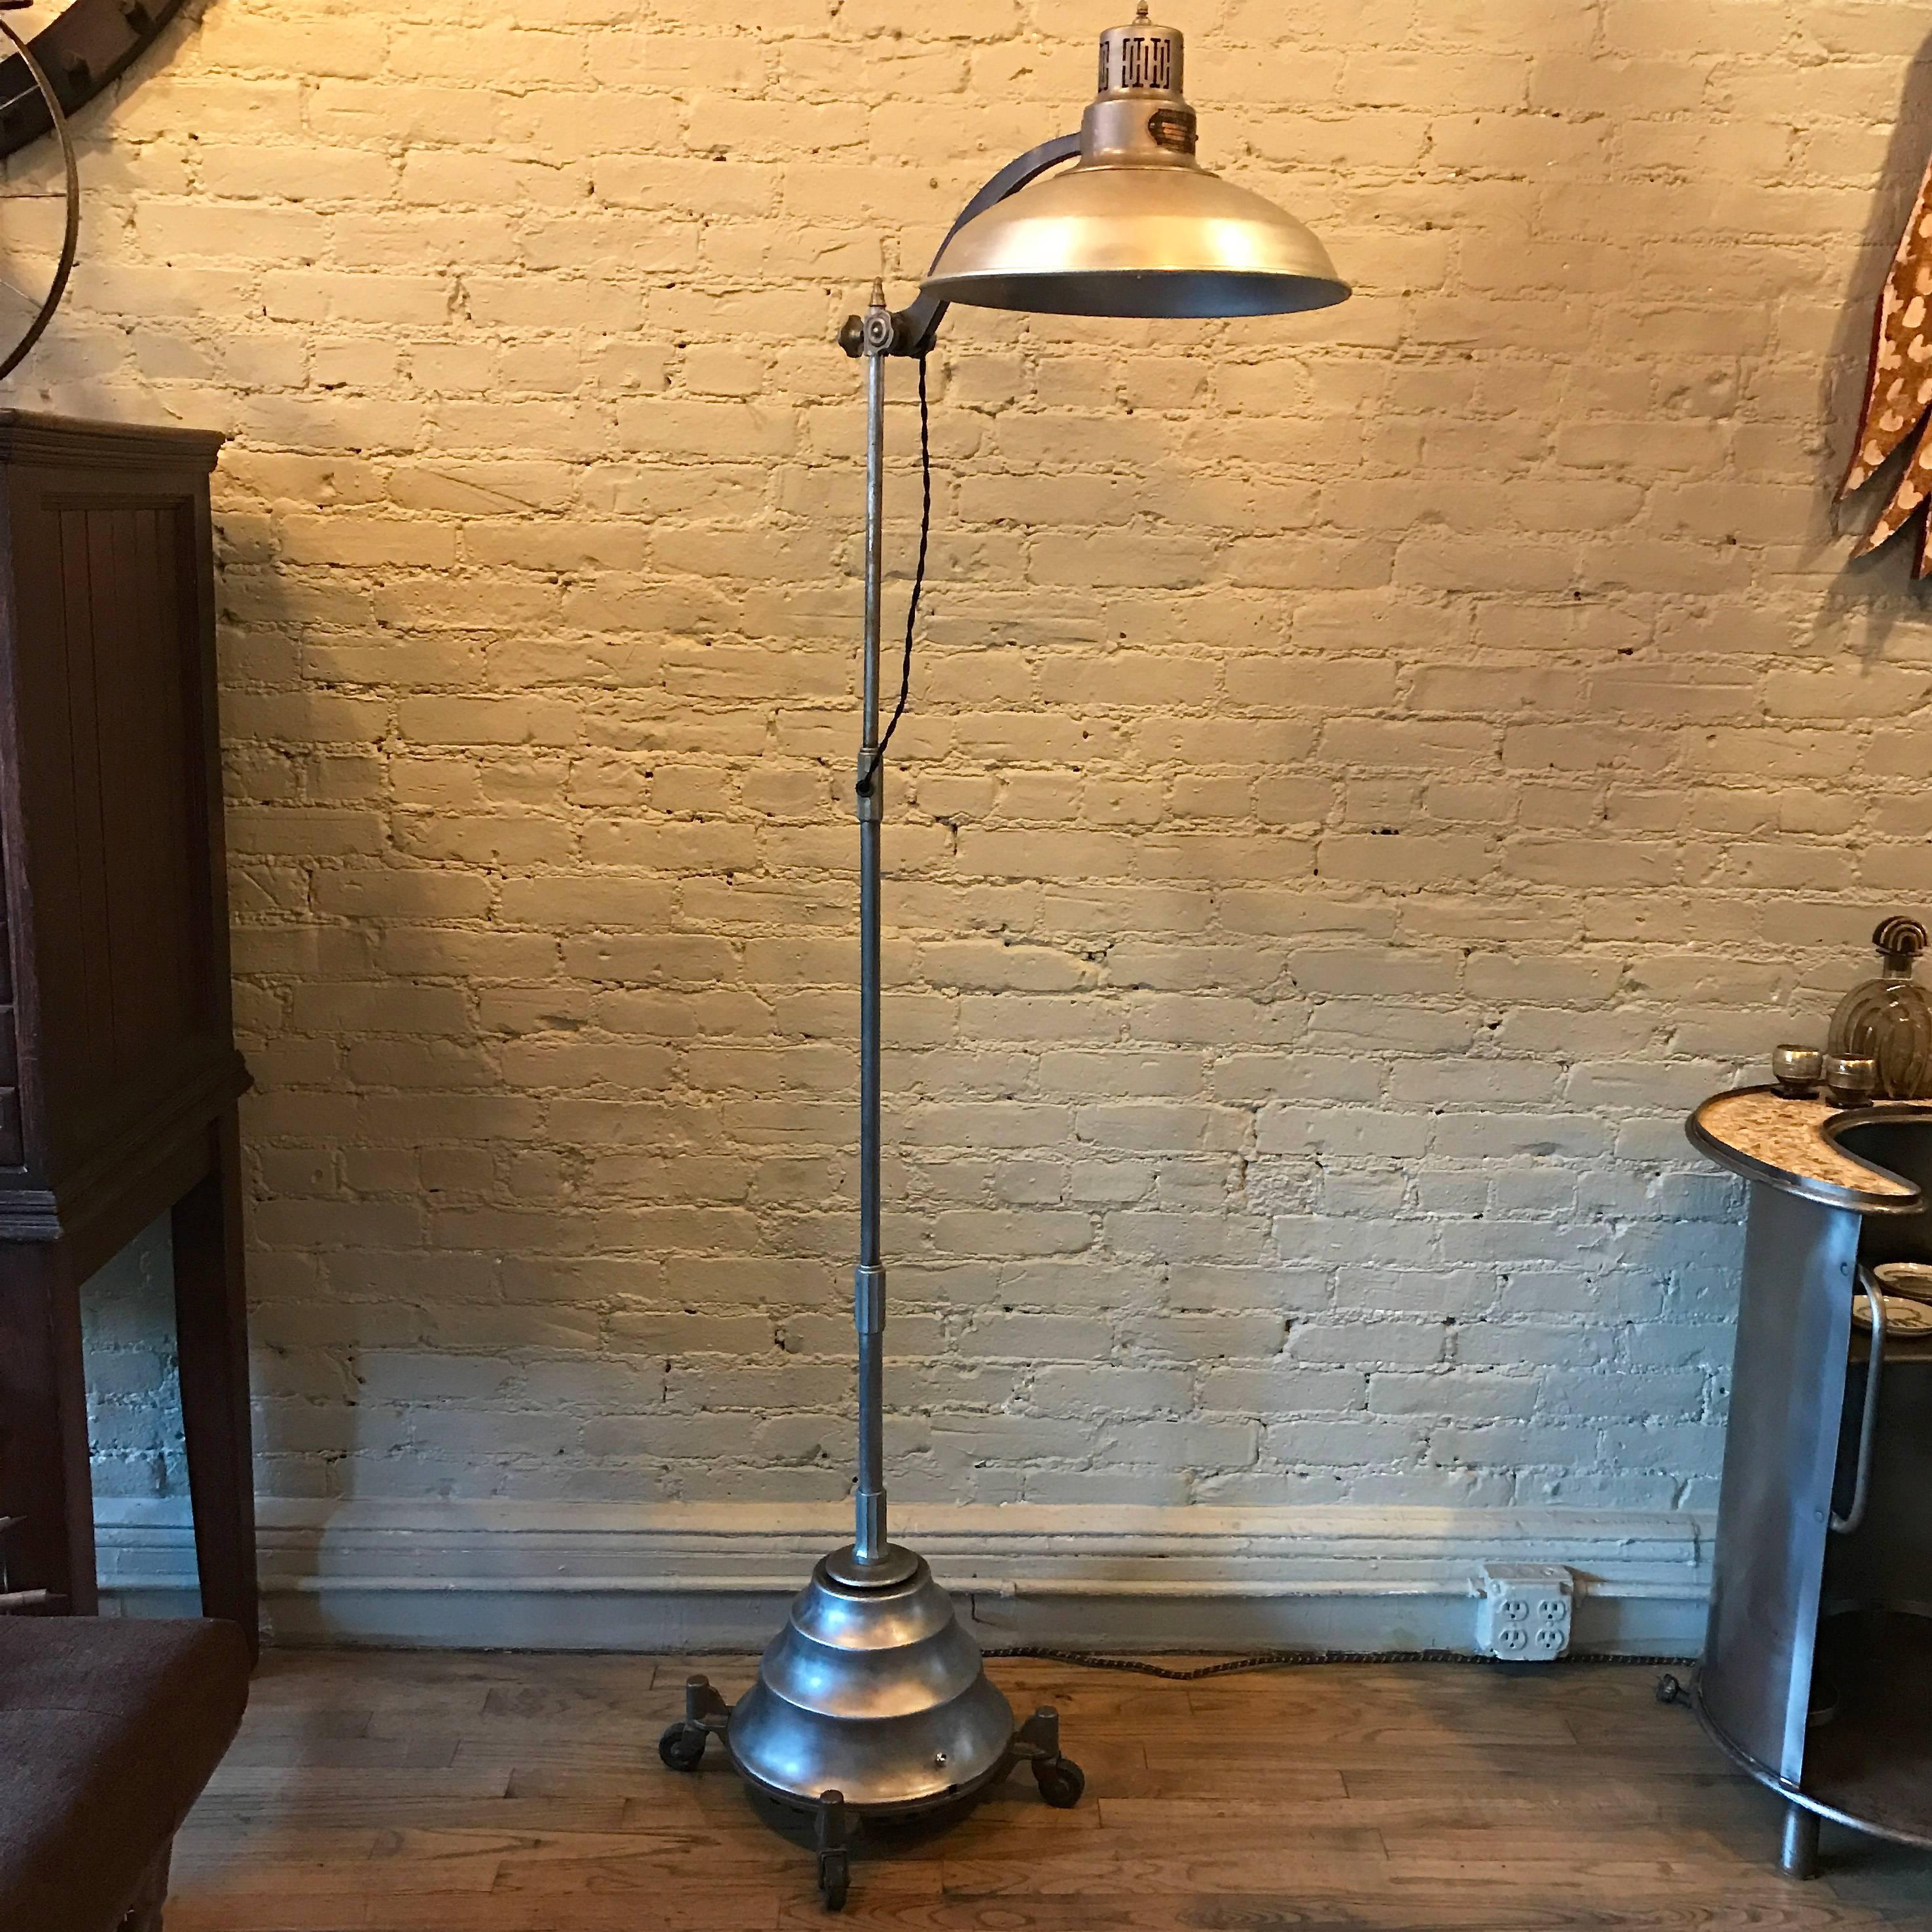 A great example of machine age lighting, General Electric, medical, sun lamp, floor lamp is steel construction with a cast iron, rolling, base and adjustable height, articulating shade. The lamp takes a medium socket incandescent bulb up to 300